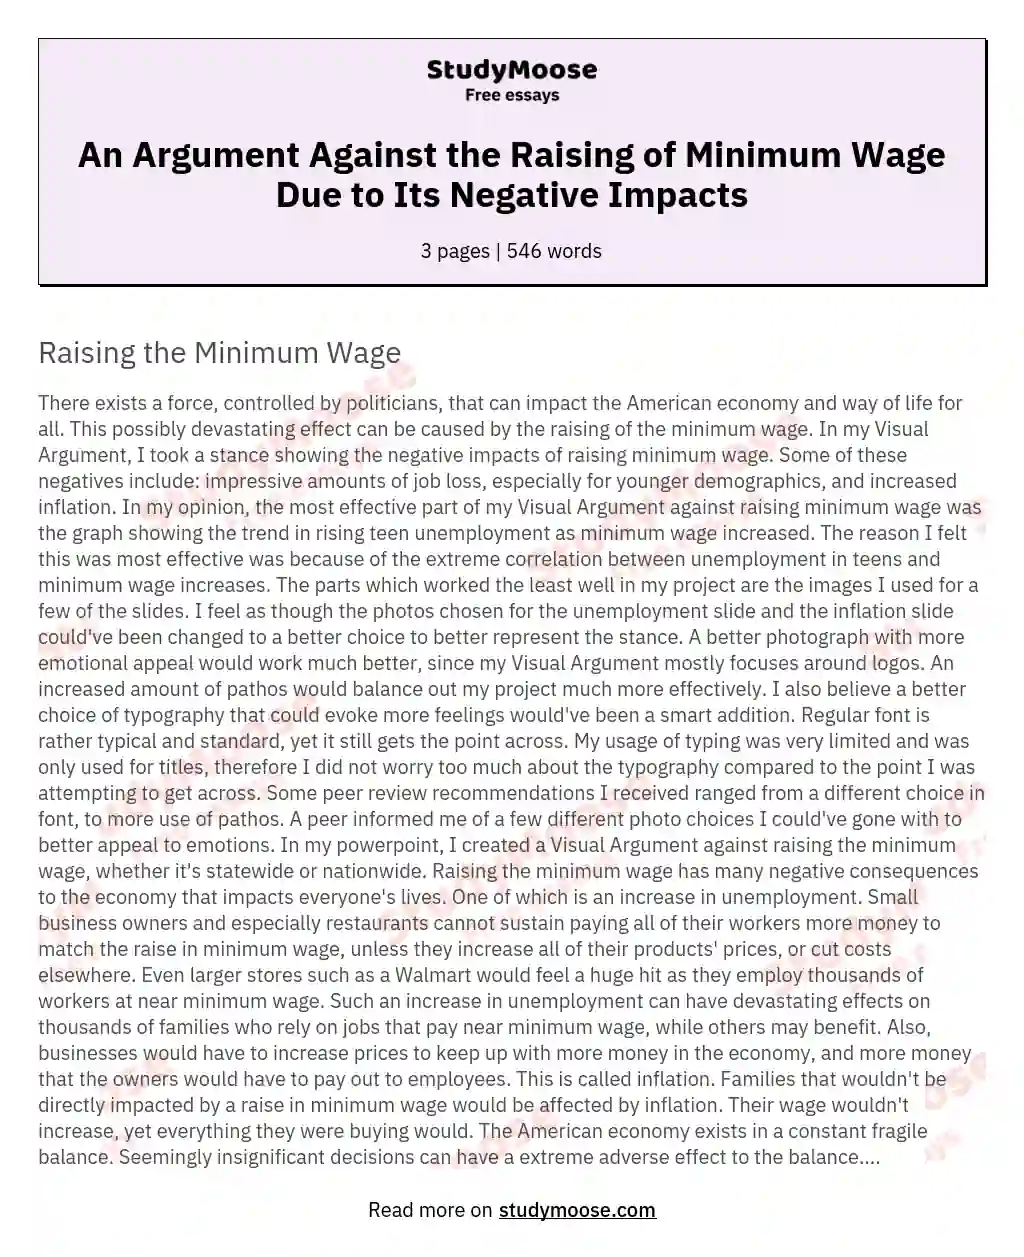 An Argument Against the Raising of Minimum Wage Due to Its Negative Impacts